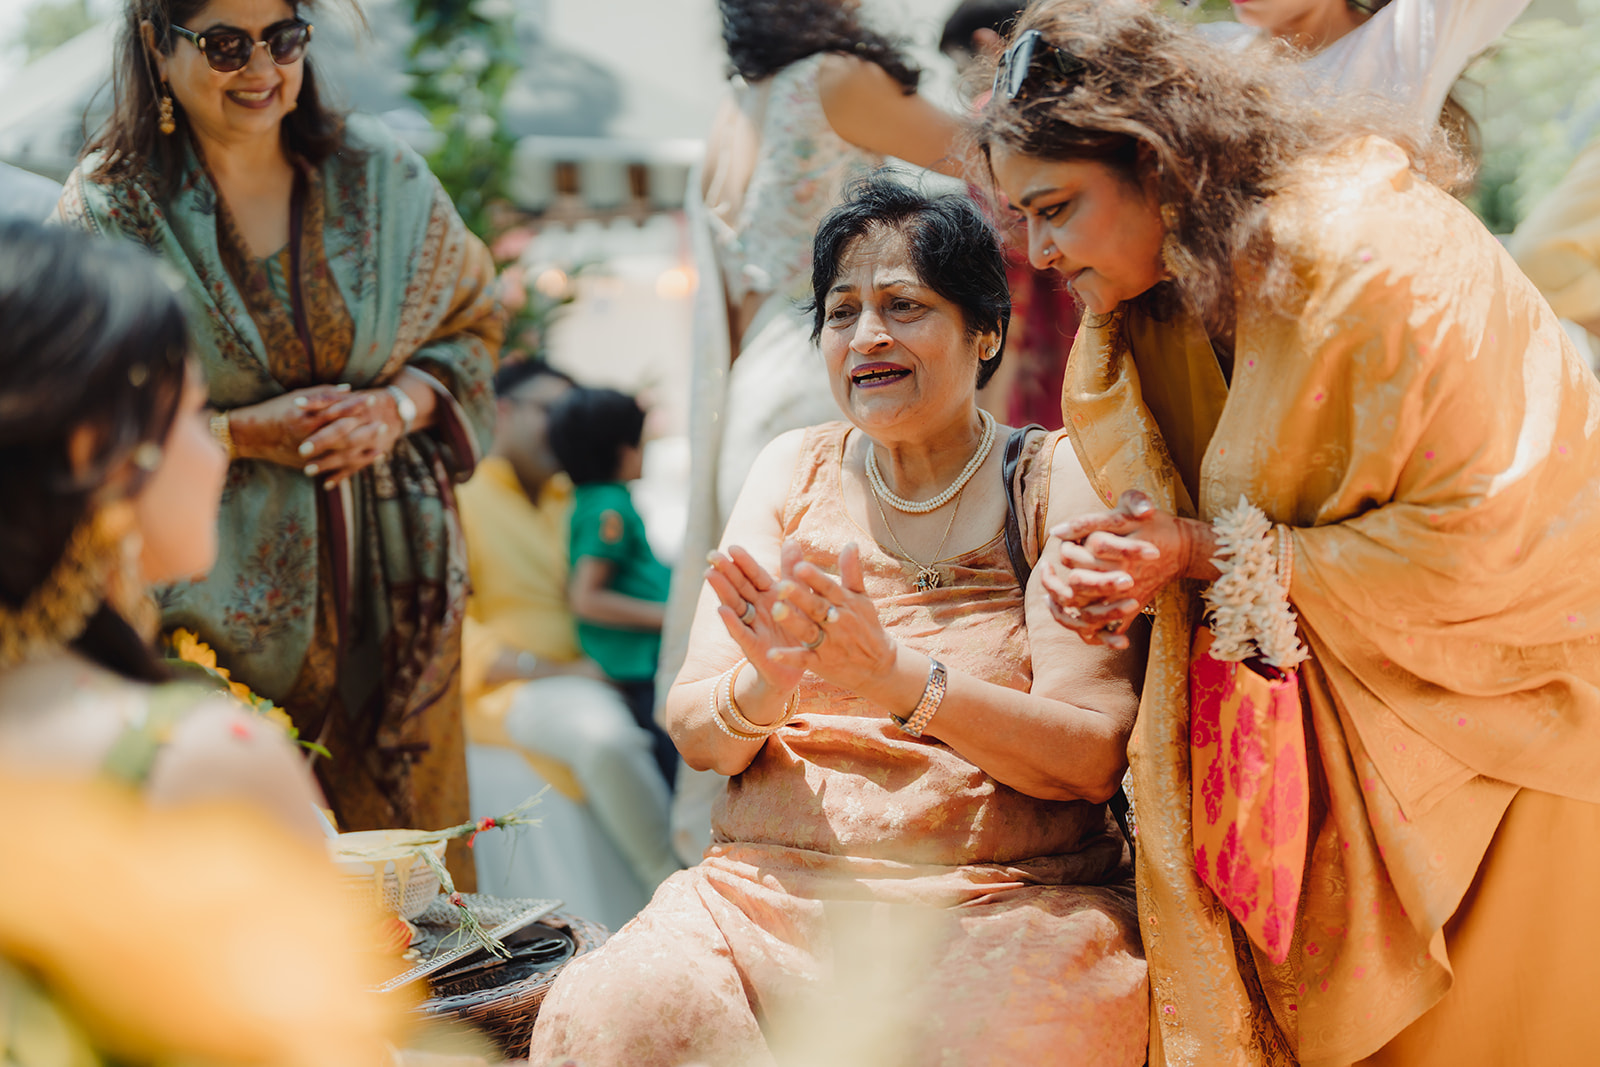 Golden moments: Smiles and laughter fill the air during the haldi celebration